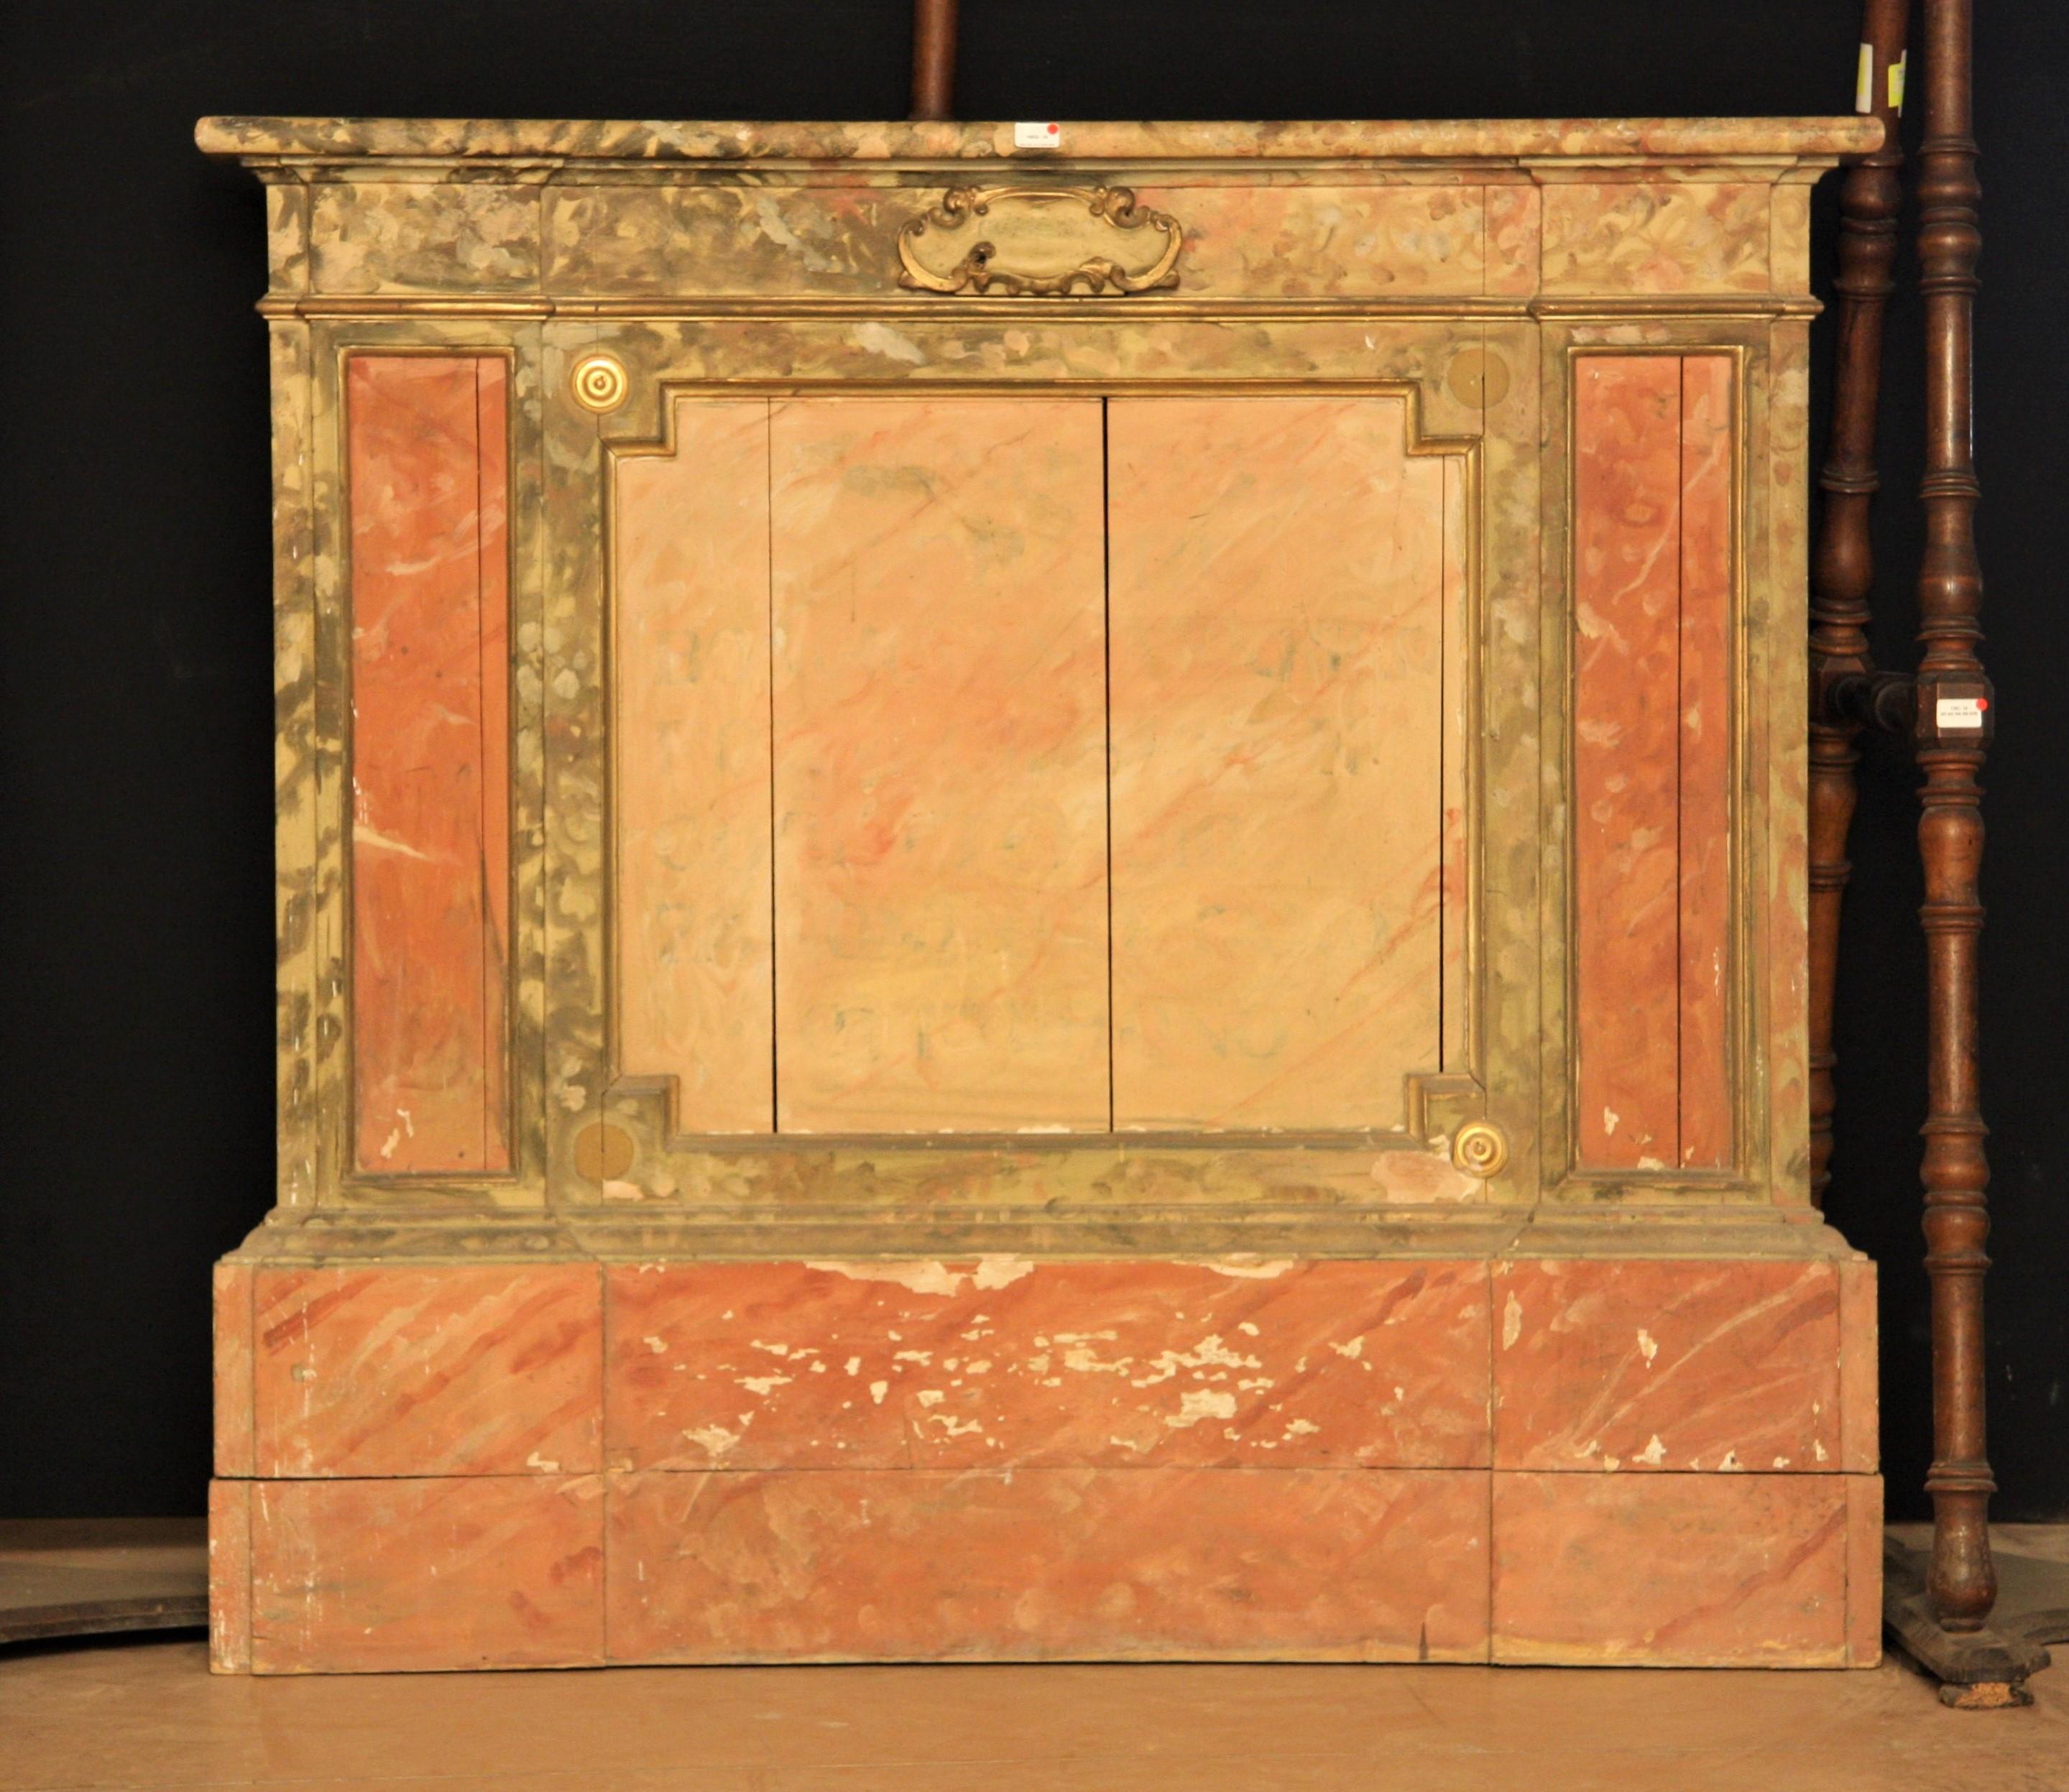 Alms box
Decorative wall-mounted element, in lacquered poplar with faux marble finish, with carved cartouche concealing a drawer for 'alms.

Early 700' epoch 
Provenance: central Italy
Rif. 10032 

(D,F).
 